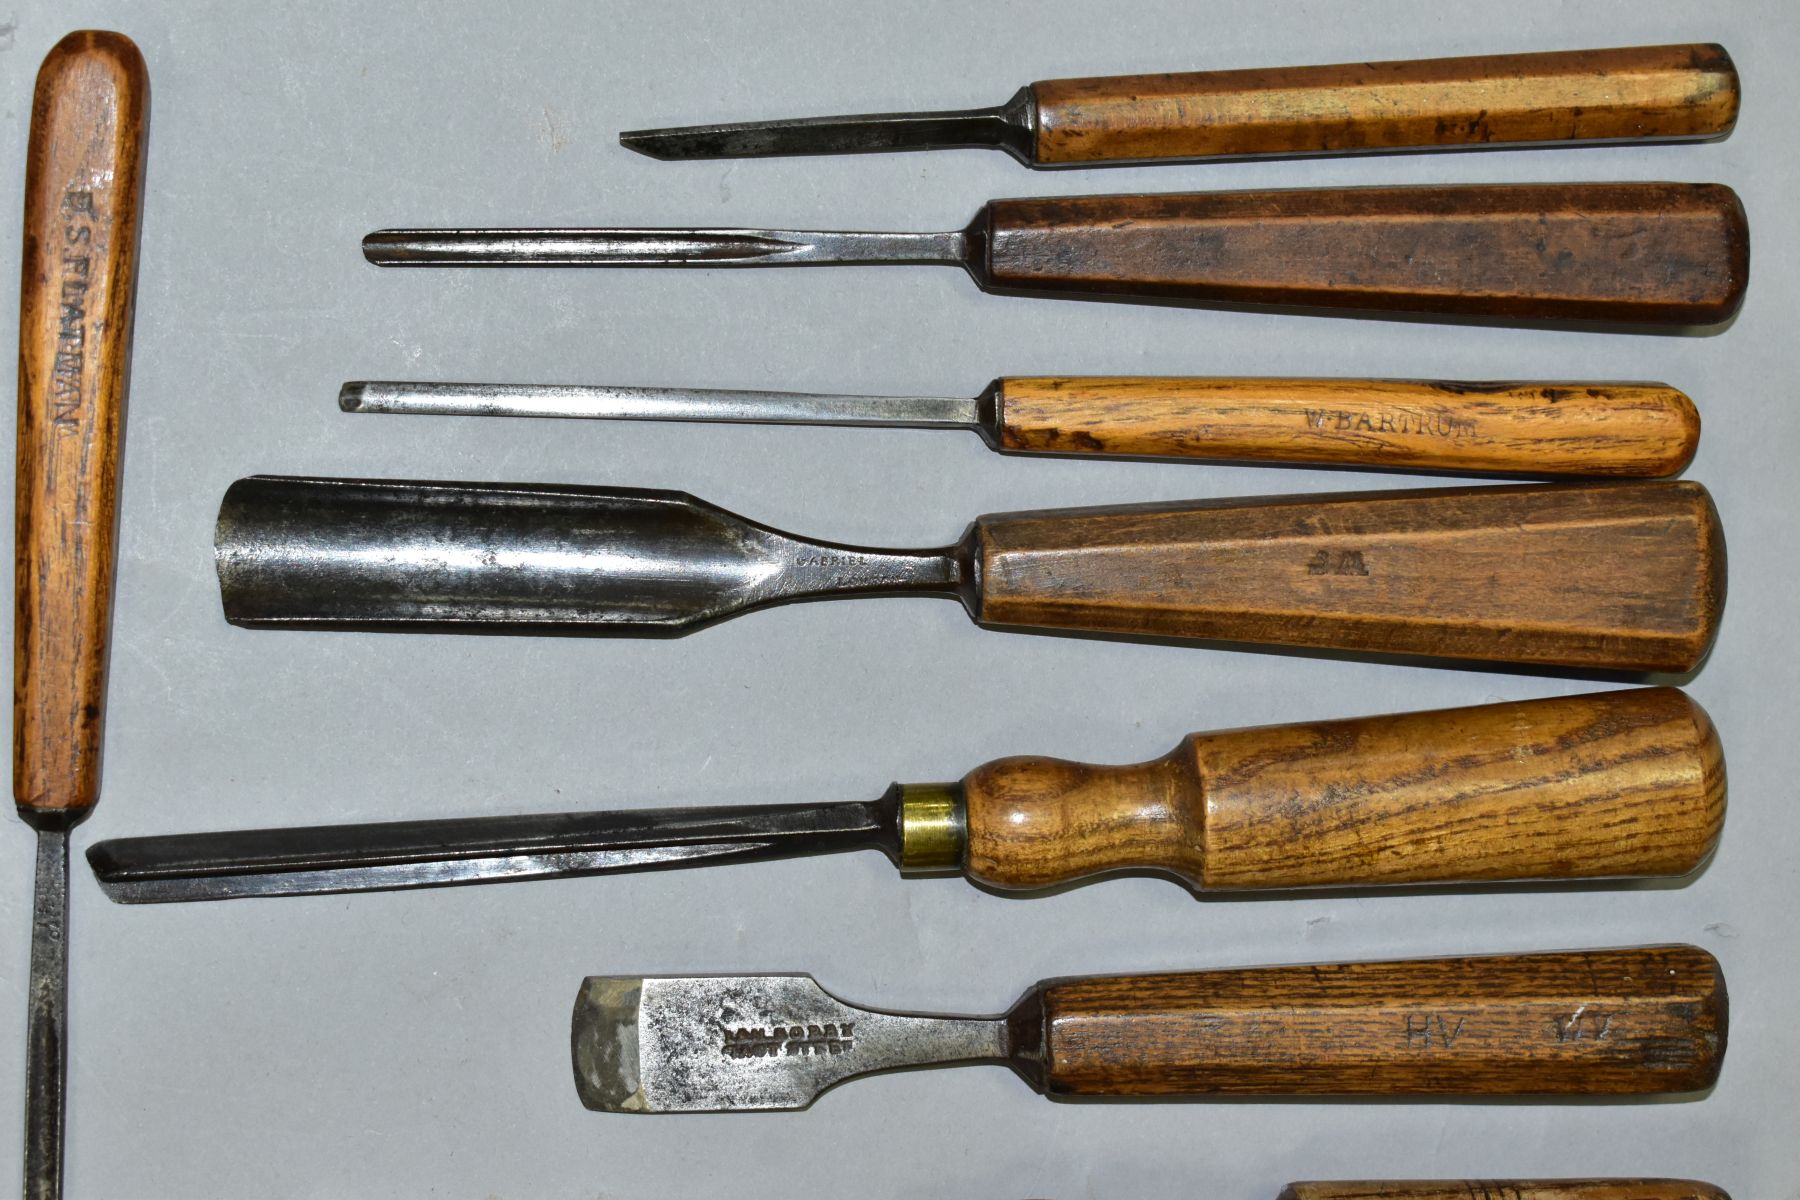 A TRAY CONTAINING TWENTY THREE EARLY CHISELS AND GOUGES including small gauge paring chisels and - Image 2 of 8